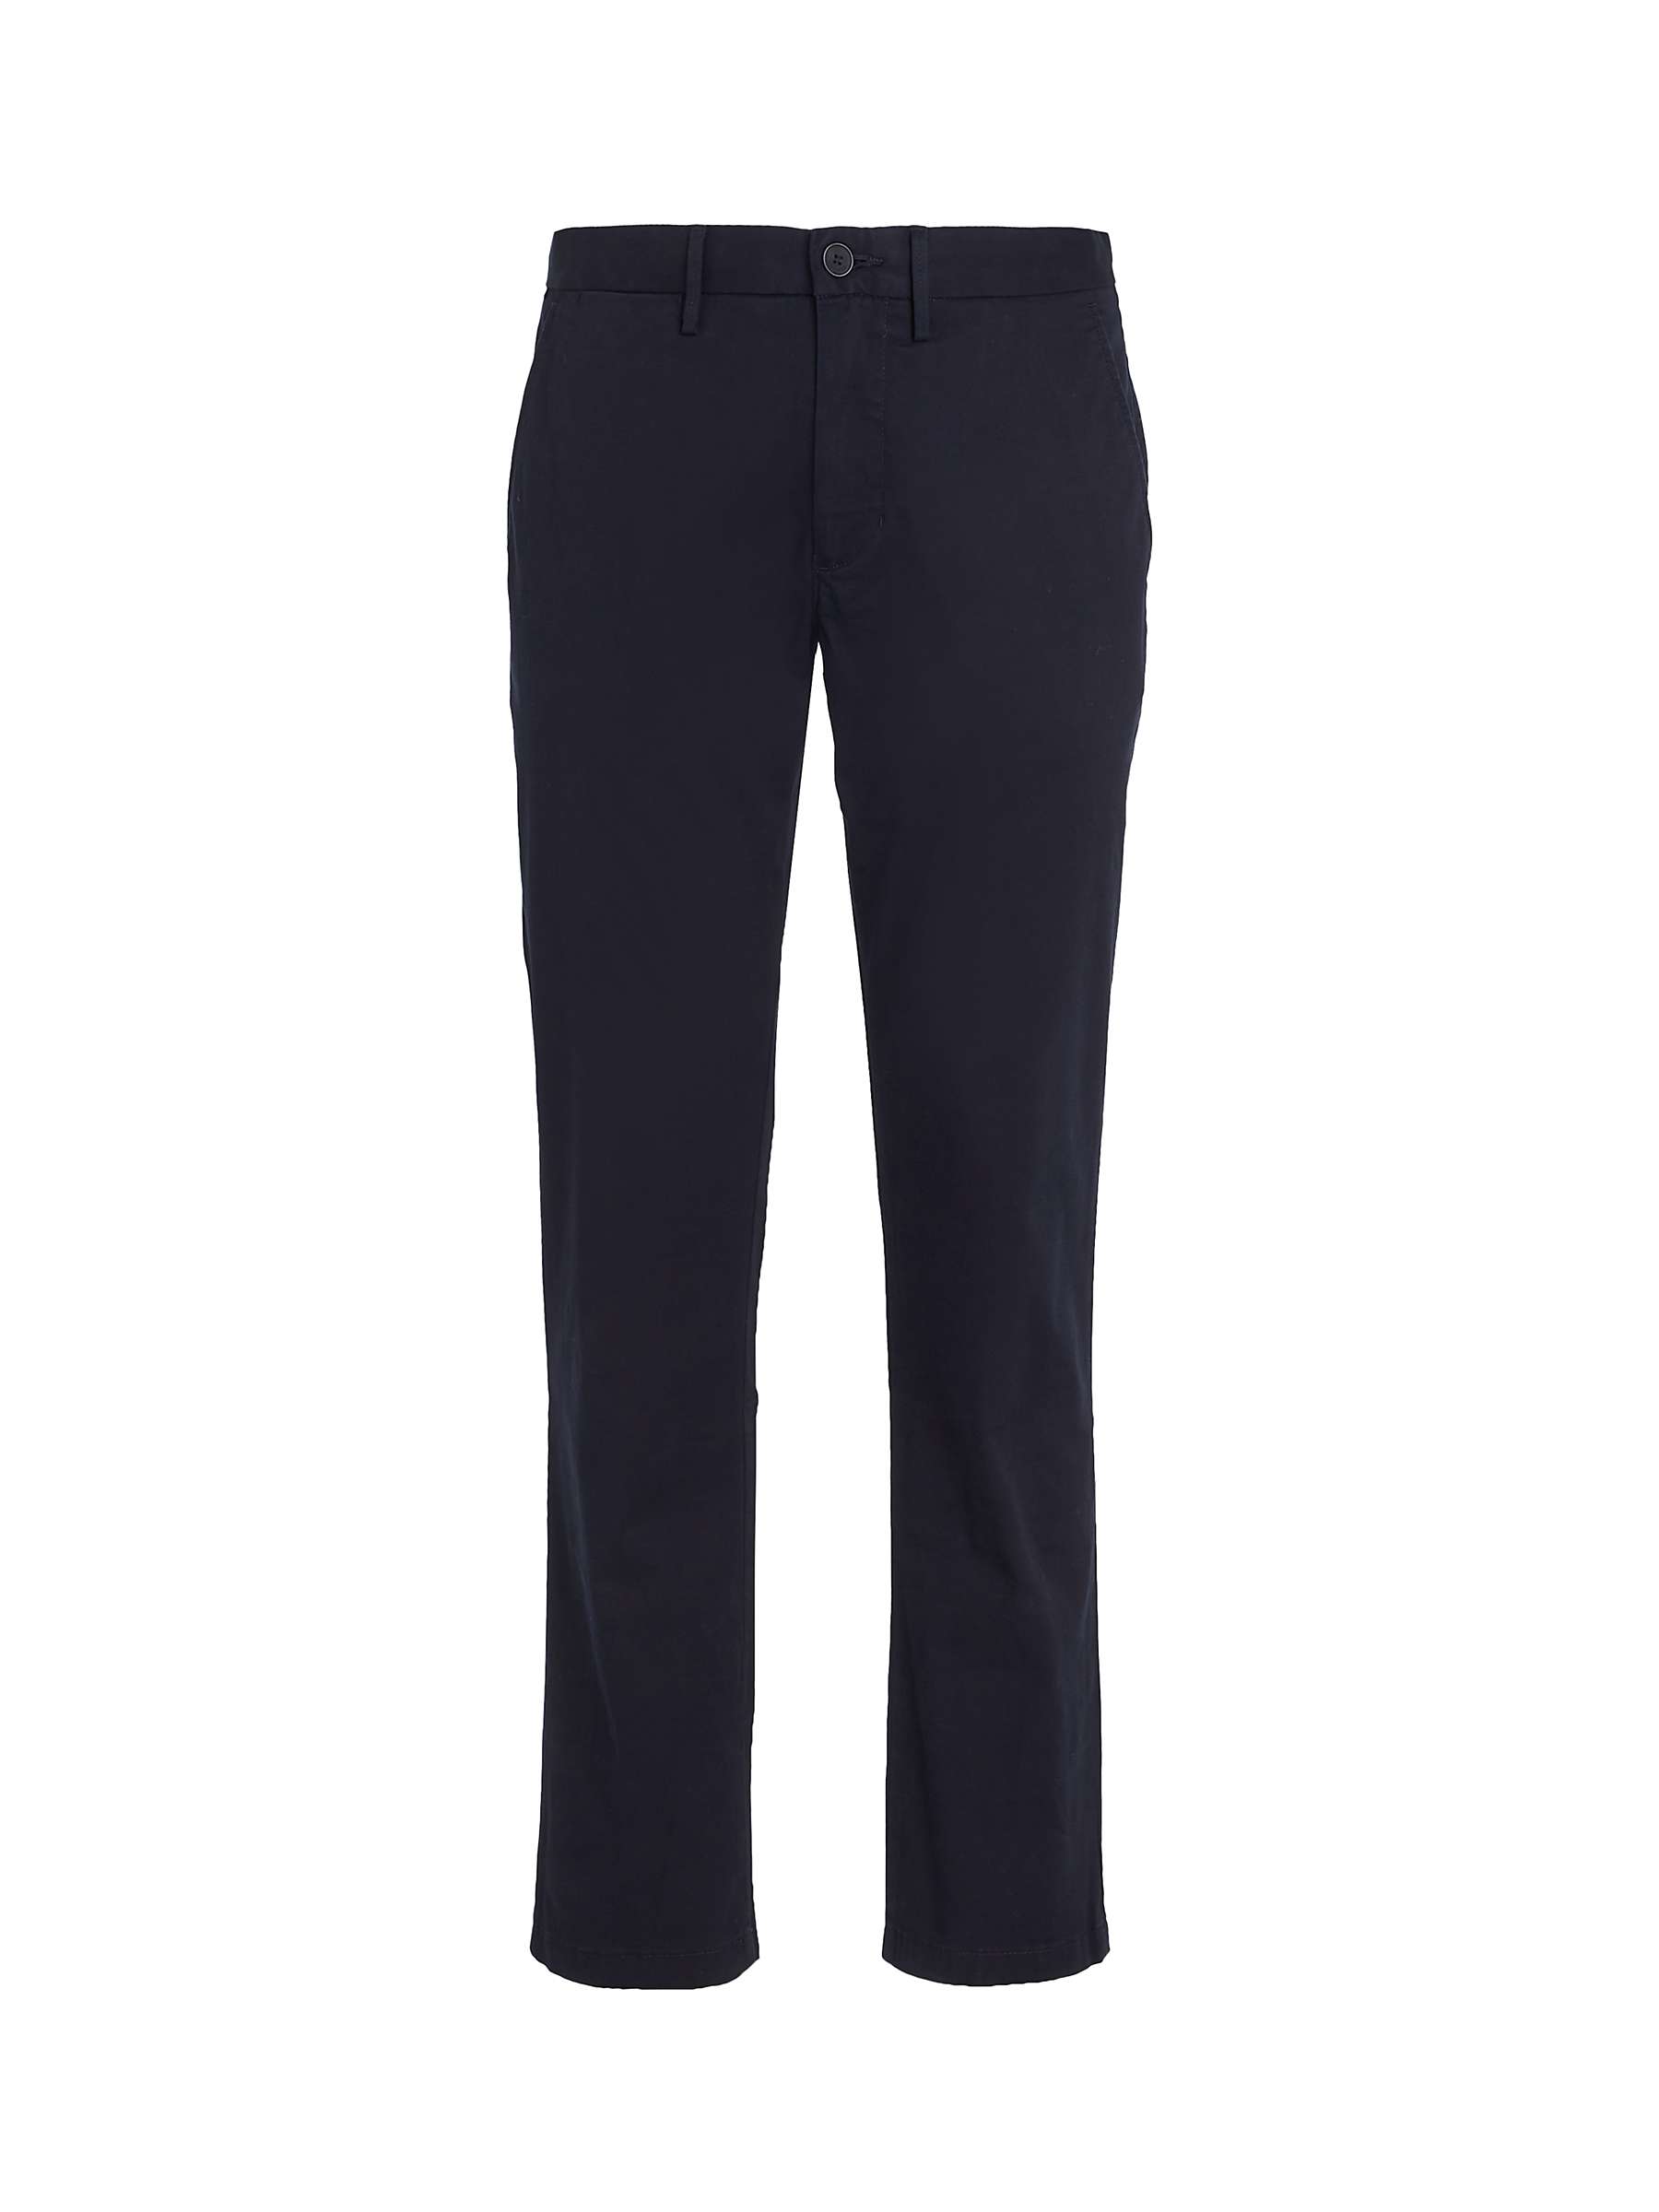 Buy Tommy Hilfiger Straight Fit Bleecker Chinos Online at johnlewis.com